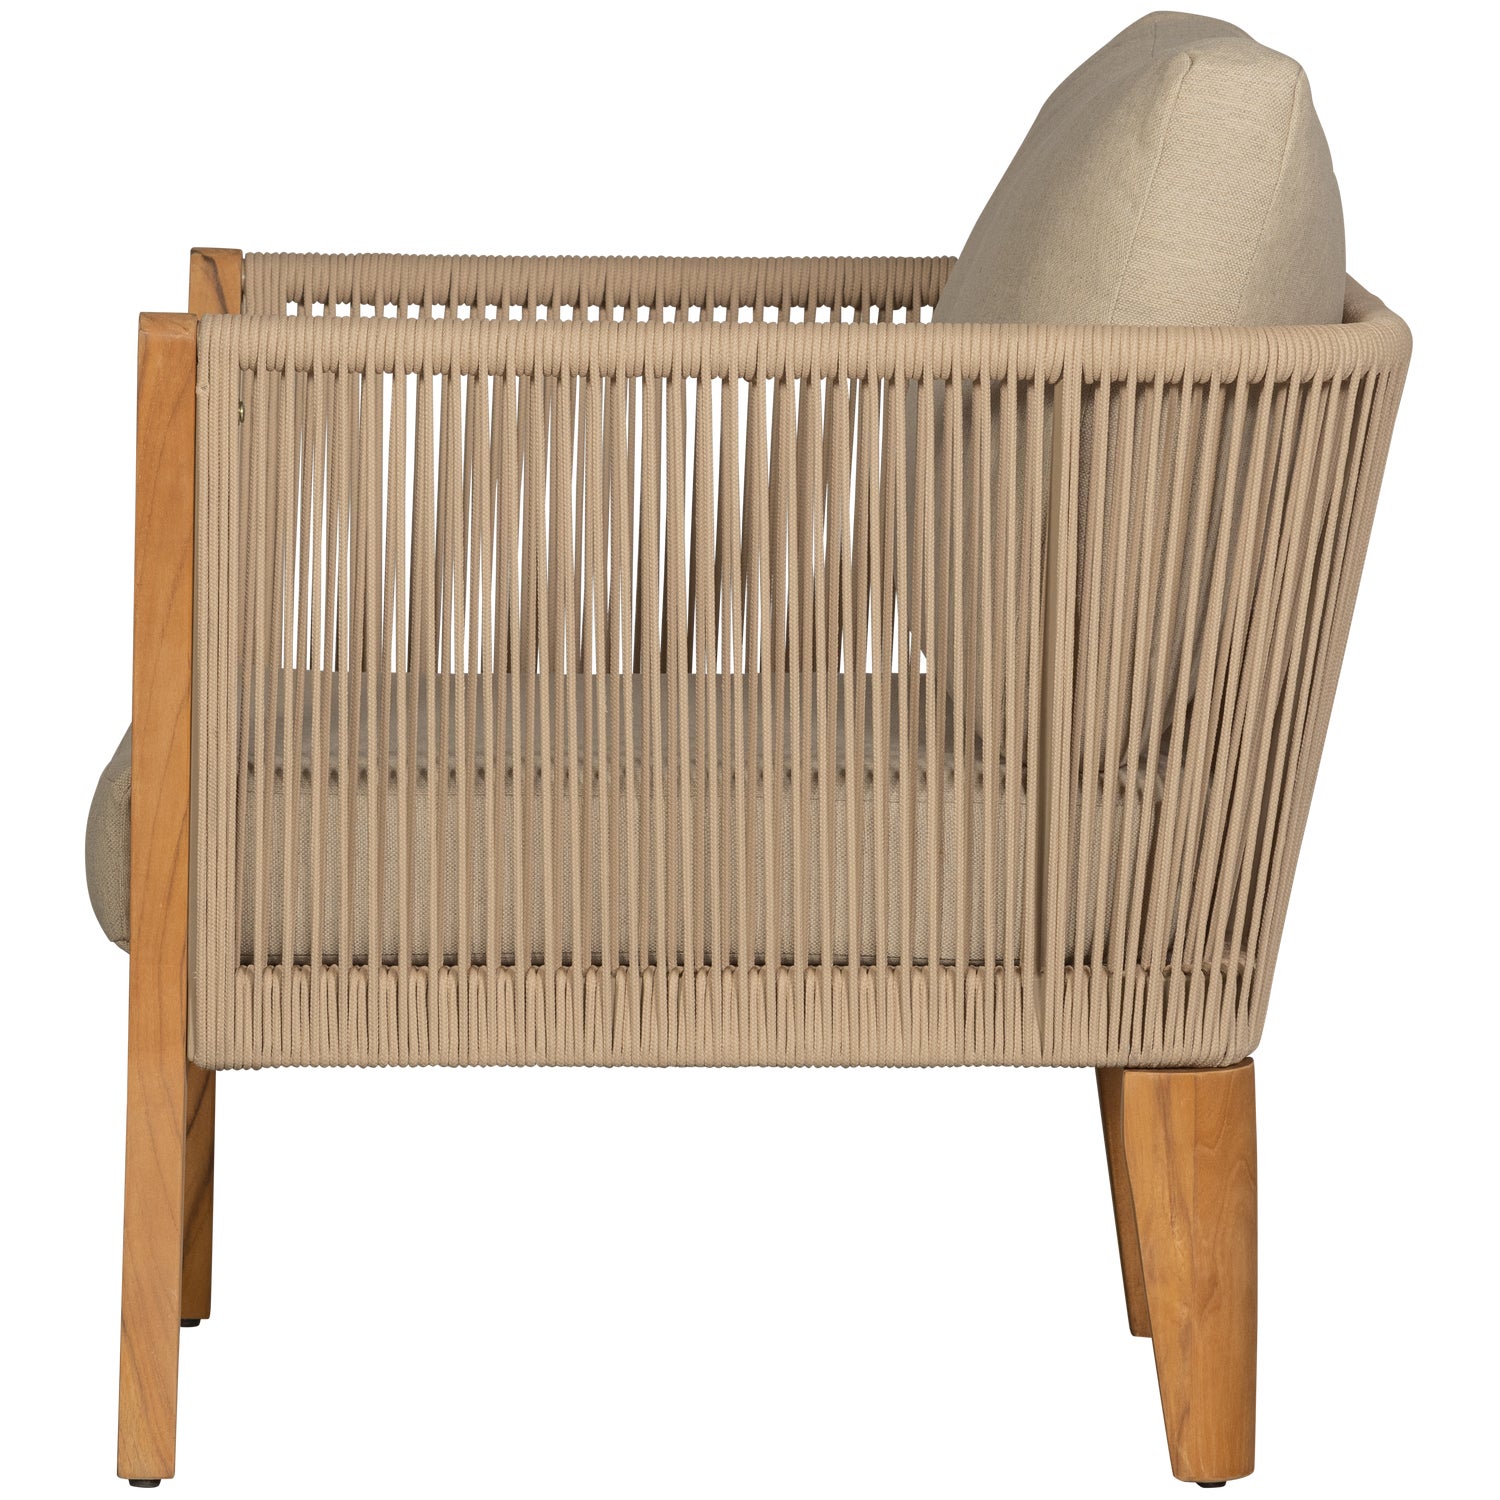 BH428LCS-03_VS_EXT_San_Remo_fauteuil_teak_zand.png?auto=webp&format=png&width=1500&height=1500